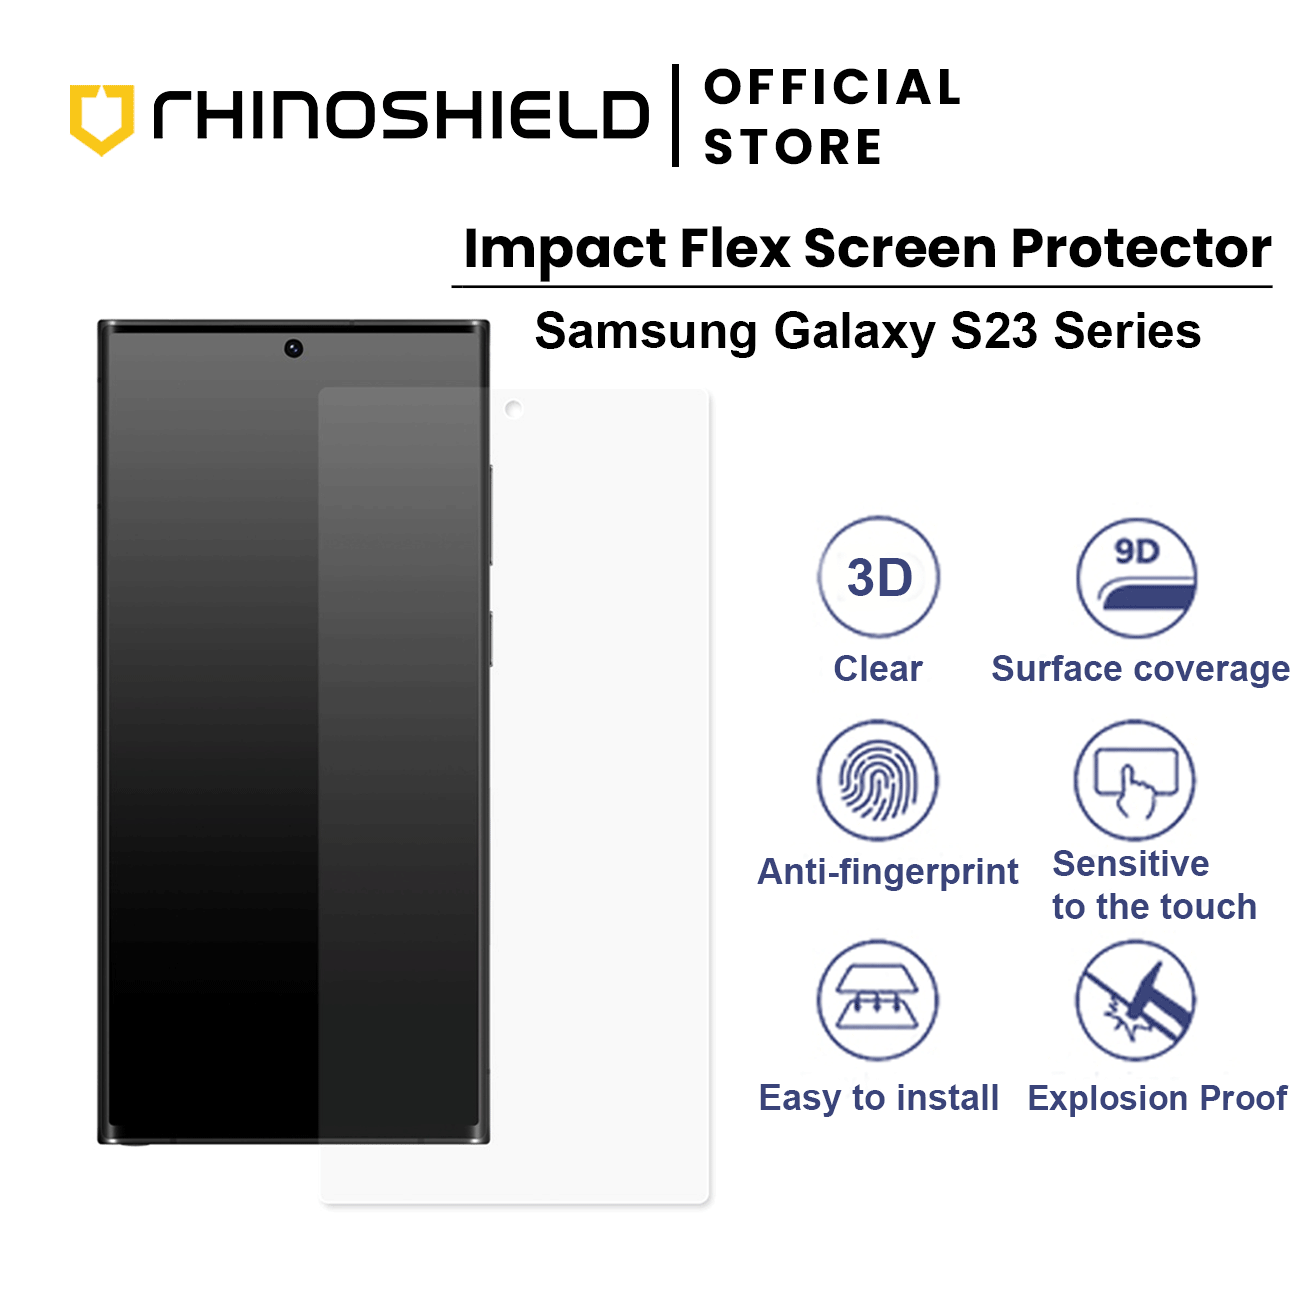 RhinoShield Screen Protector compatible with [Galaxy S23 Ultra] | Impact  Flex - Edge to Edge/Impact Damping - Clear and Scratch Resistant Screen